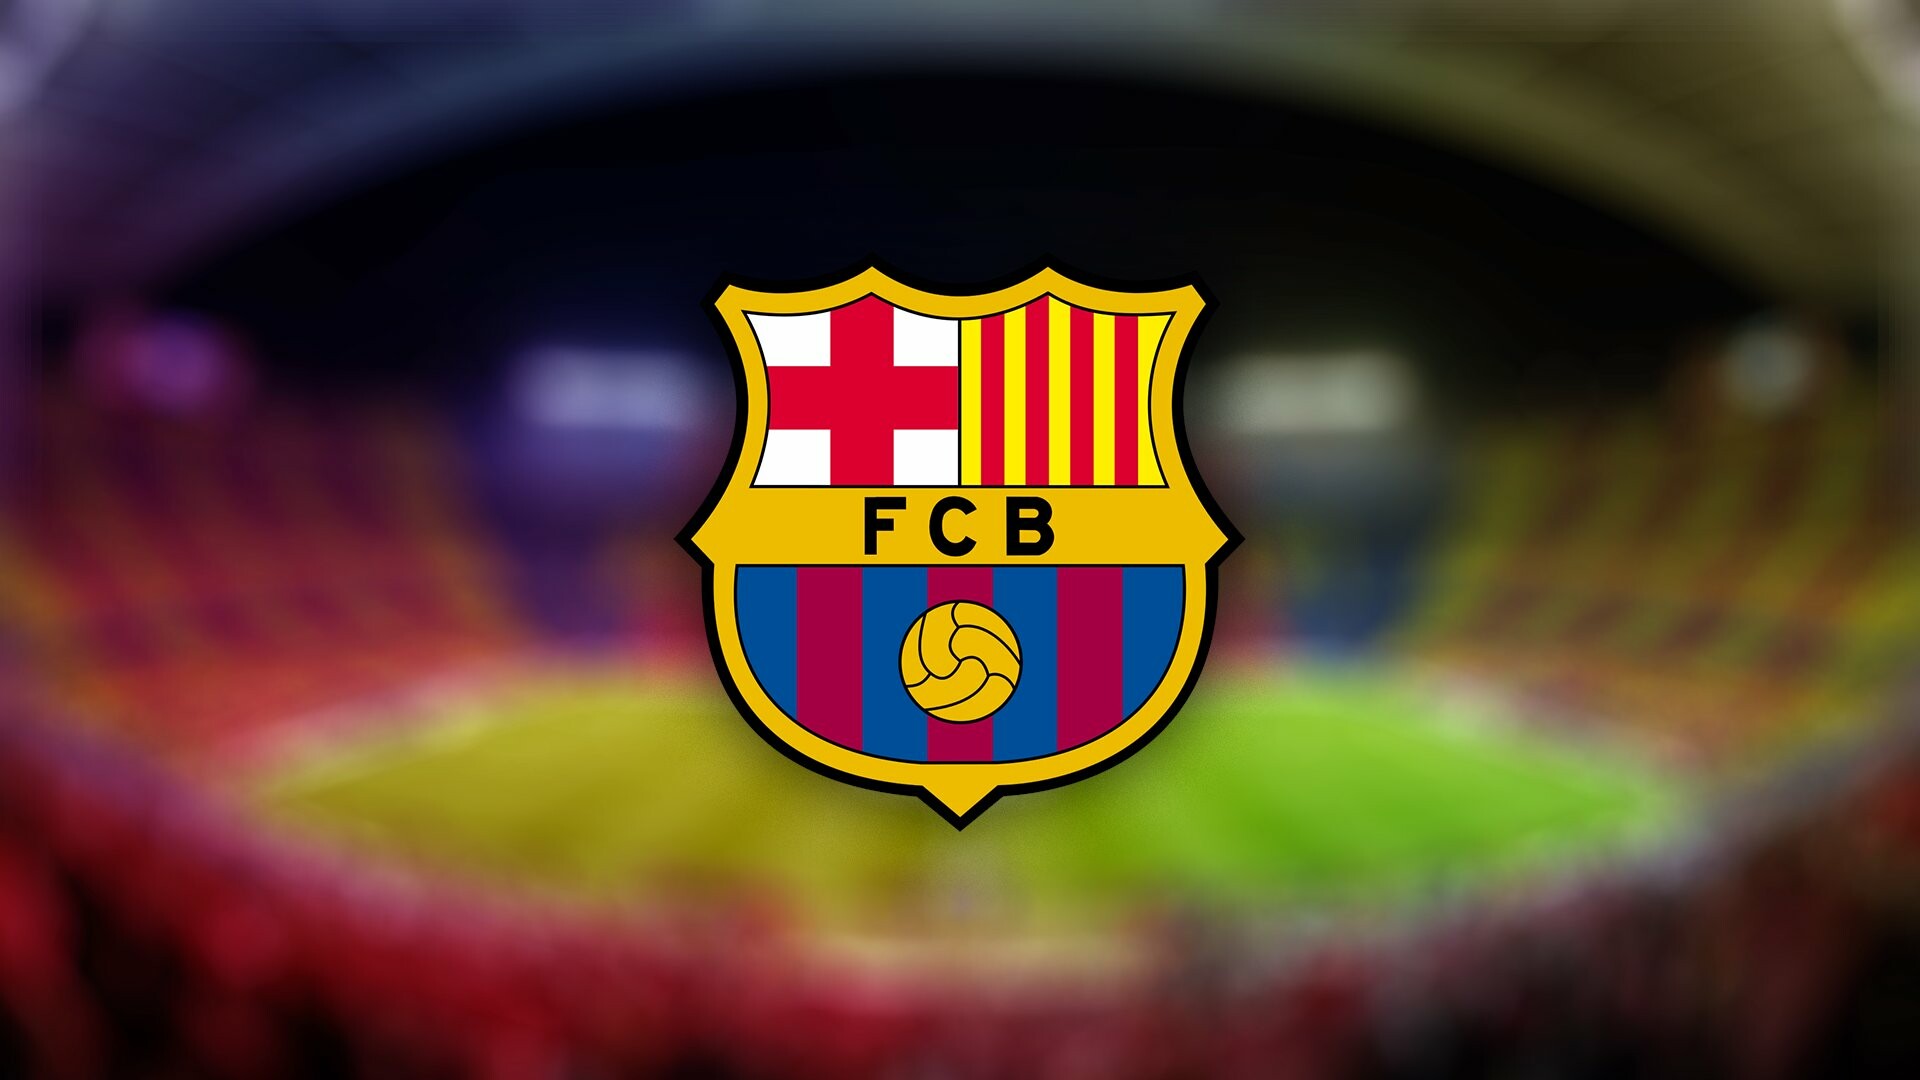 FC Barcelona: Barca, Ranked second most valuable club in the world by Forbes magazine. 1920x1080 Full HD Wallpaper.